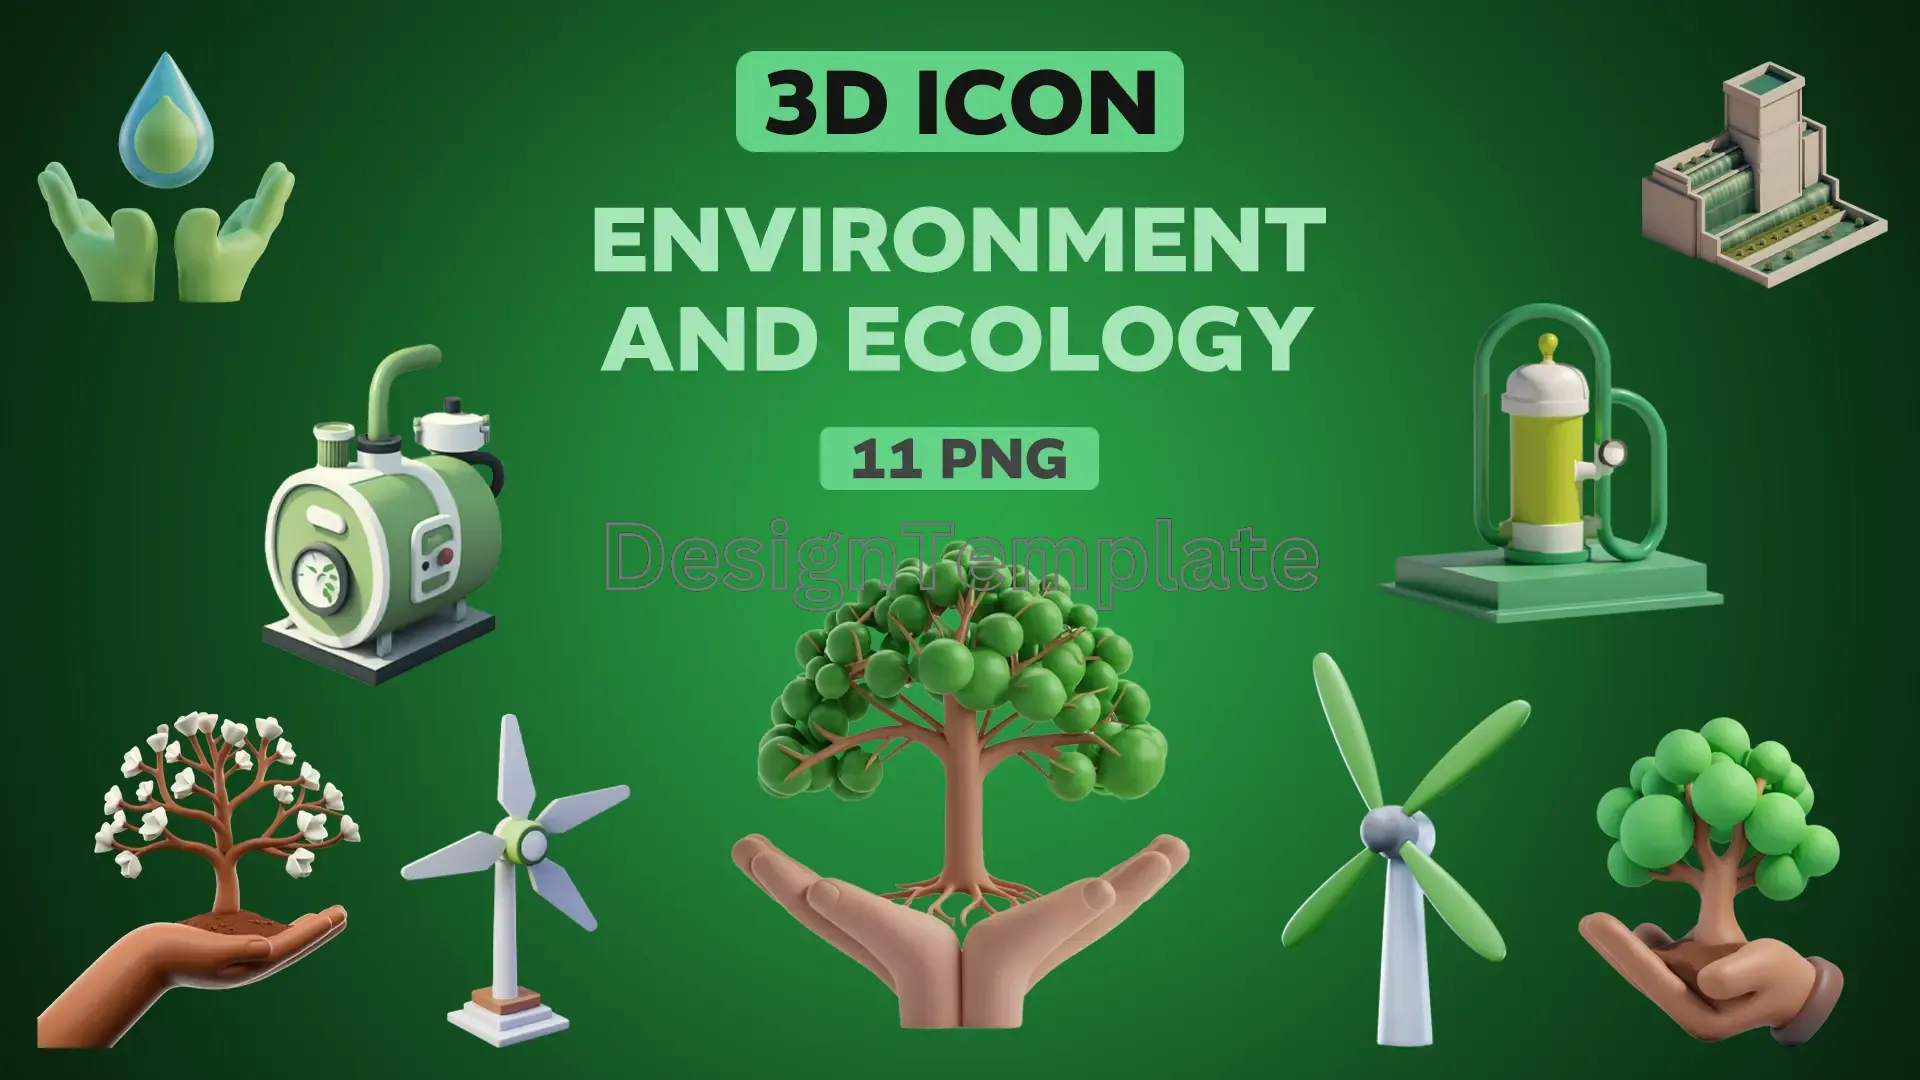 Eco Revolution 3D Icons Collection image